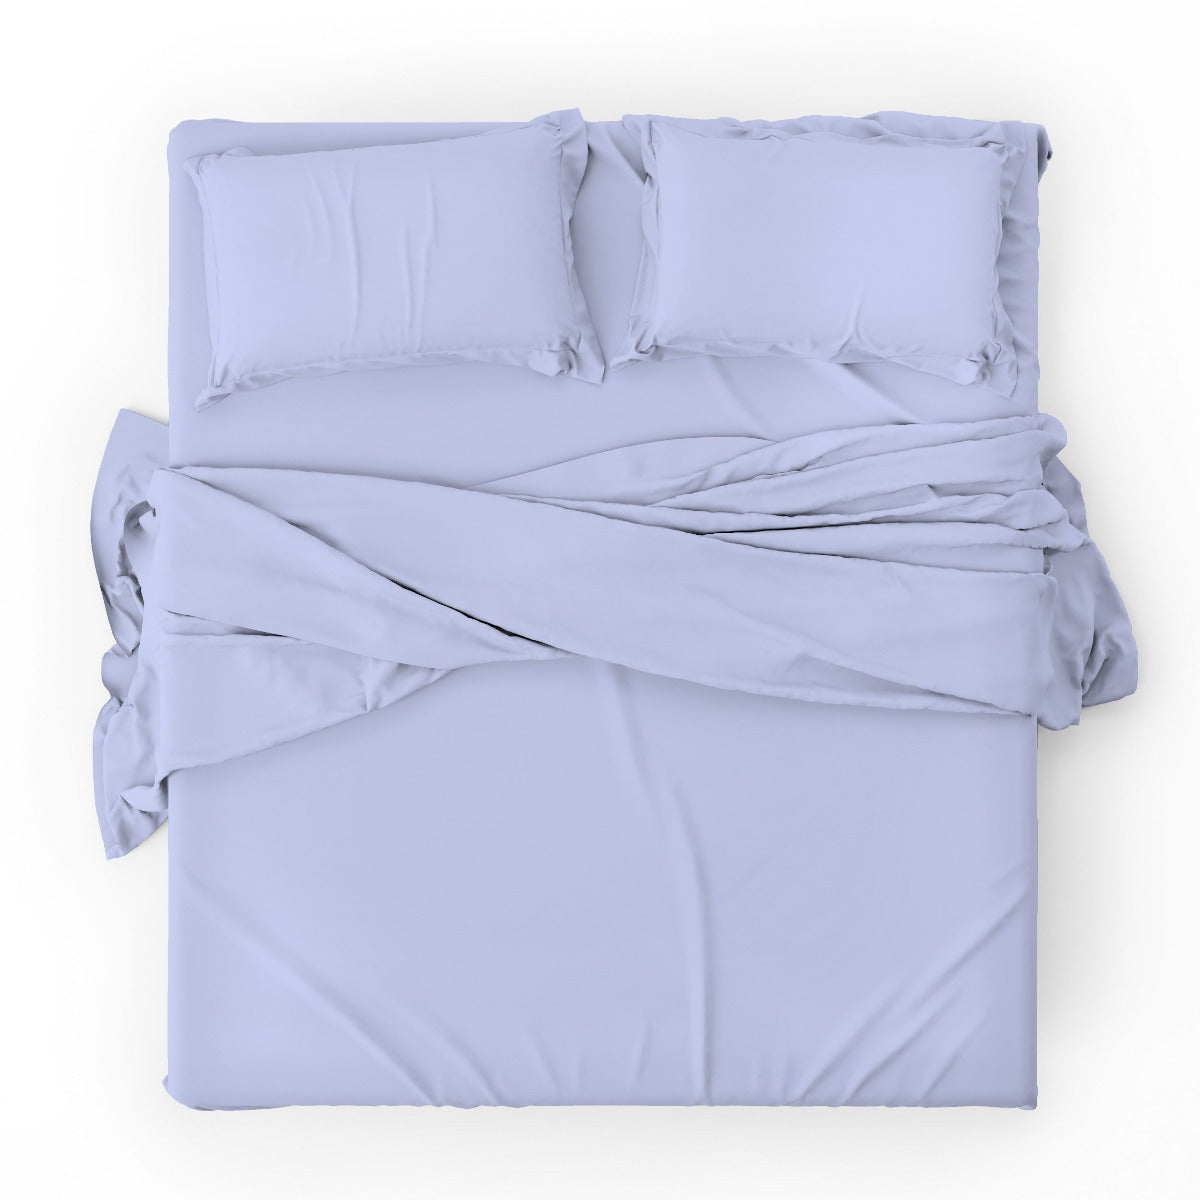 Duvet cover with pillowcases - Light Blue Solid Color